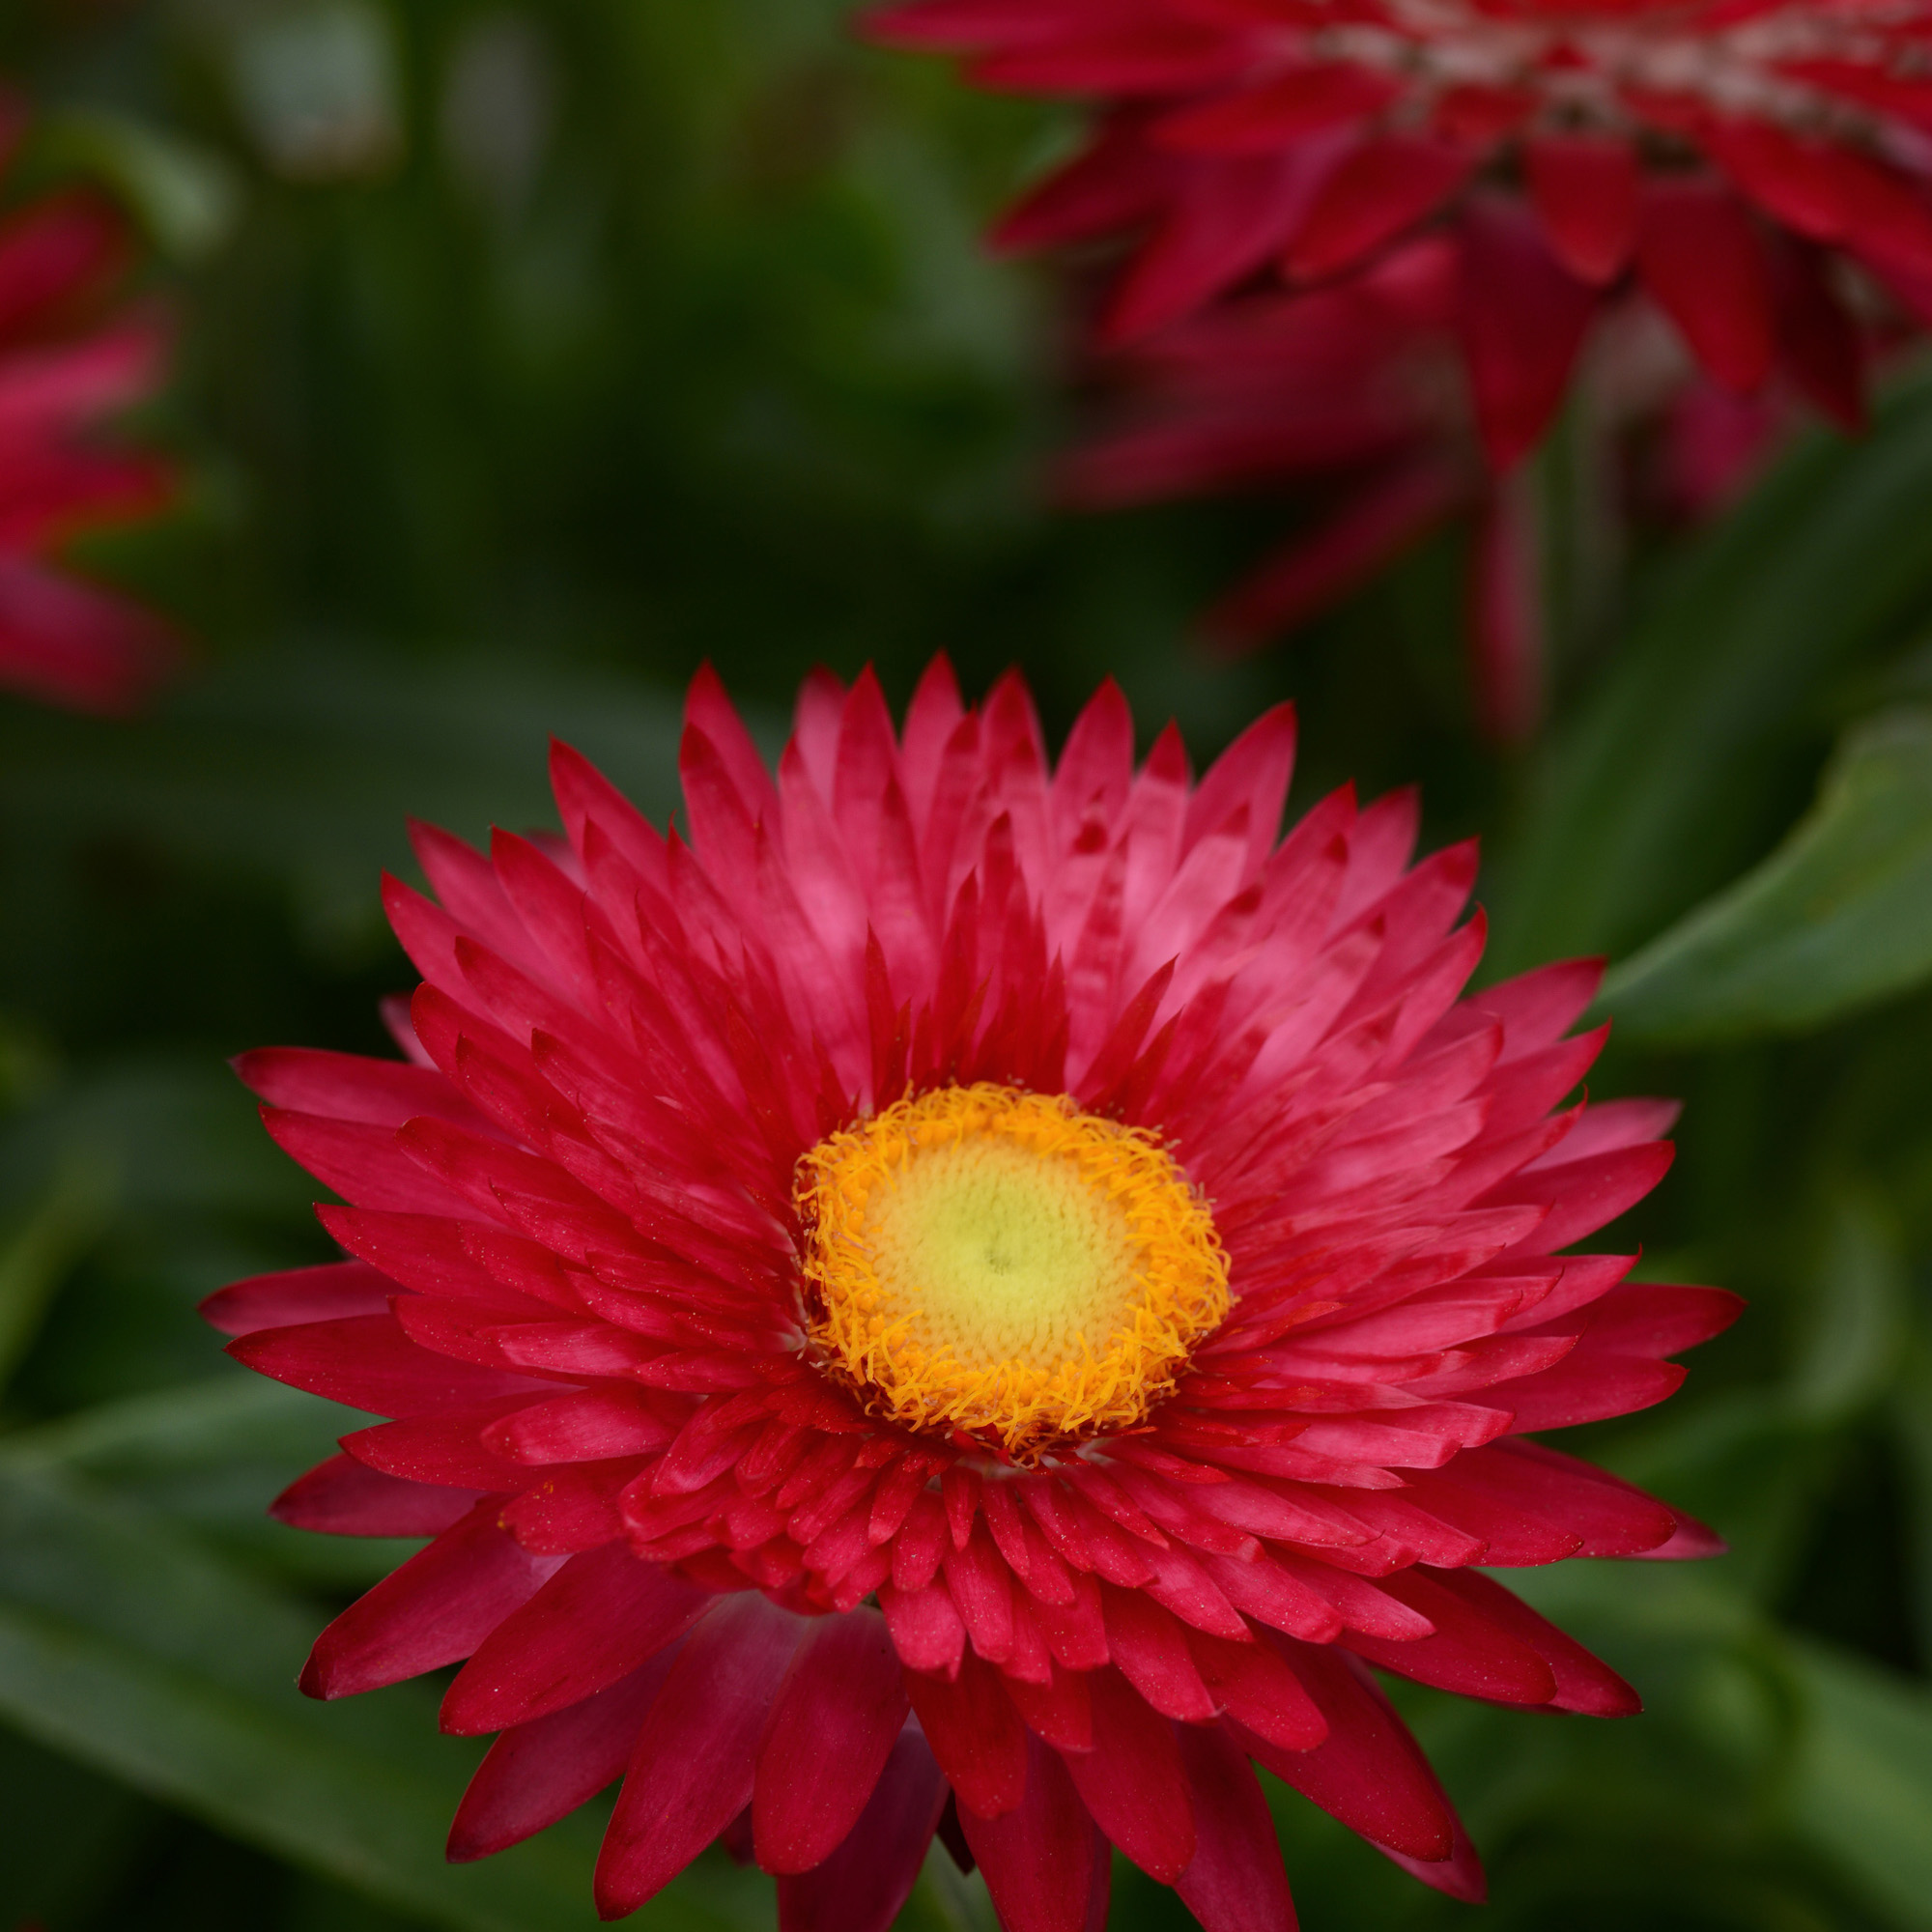 A strawflower by any other name